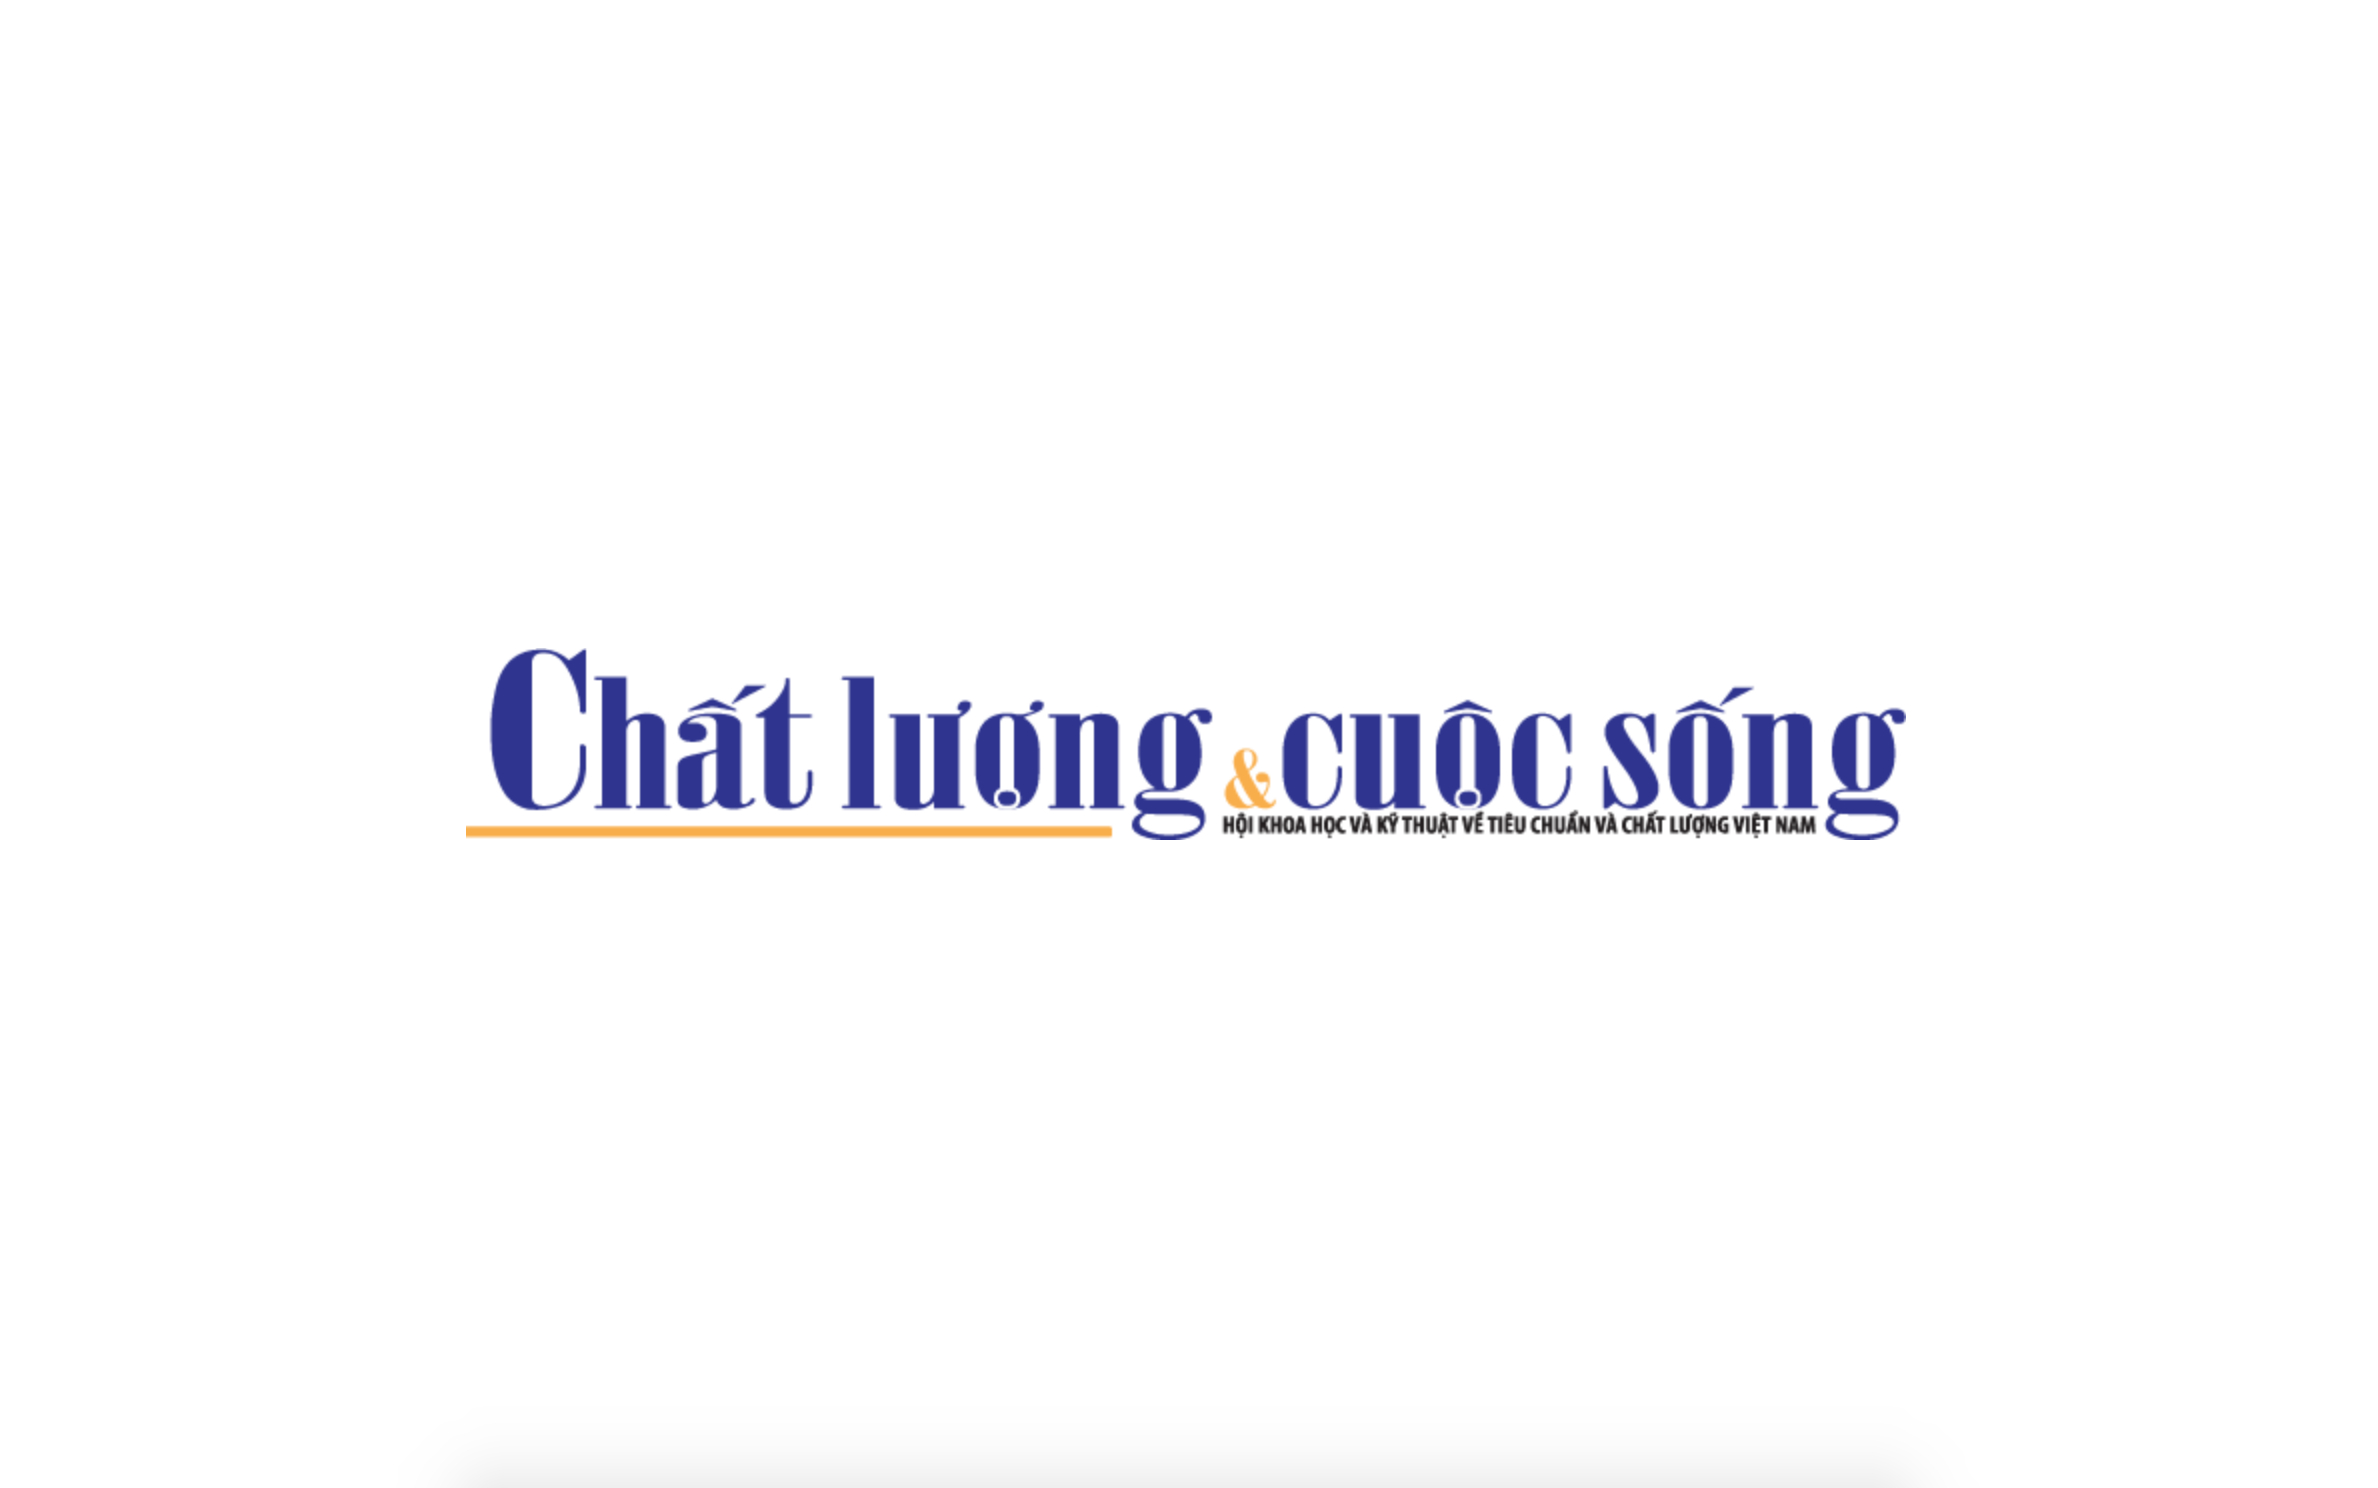 www.chatluongvacuocsong.vn